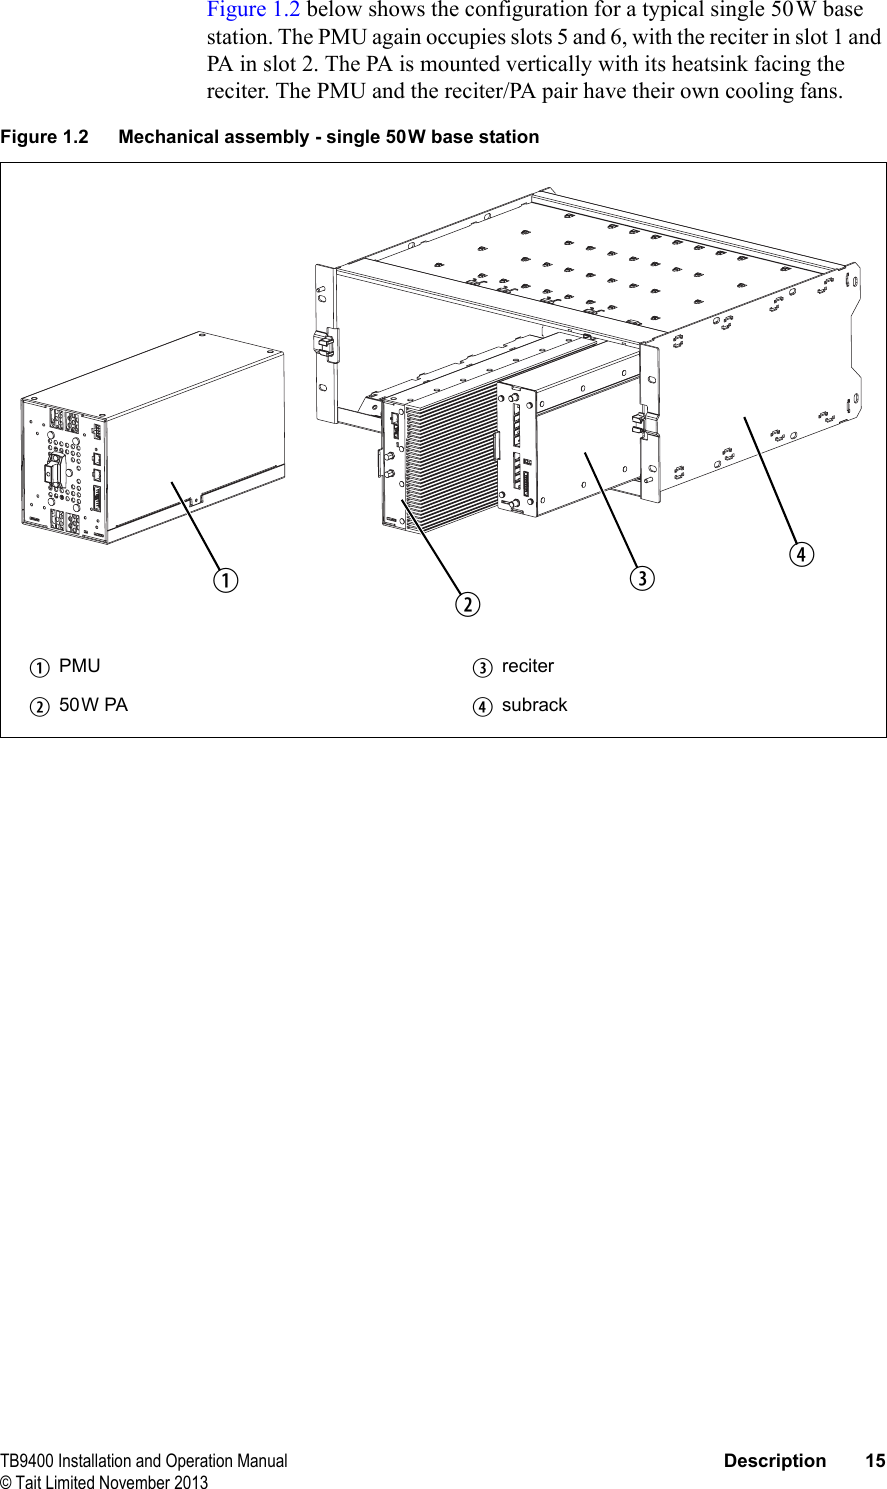  TB9400 Installation and Operation Manual Description 15© Tait Limited November 2013Figure 1.2 below shows the configuration for a typical single 50W base station. The PMU again occupies slots 5 and 6, with the reciter in slot 1 and PA in slot 2. The PA is mounted vertically with its heatsink facing the reciter. The PMU and the reciter/PA pair have their own cooling fans.Figure 1.2 Mechanical assembly - single 50W base stationbPMU dreciterc50W PA esubrackbcde